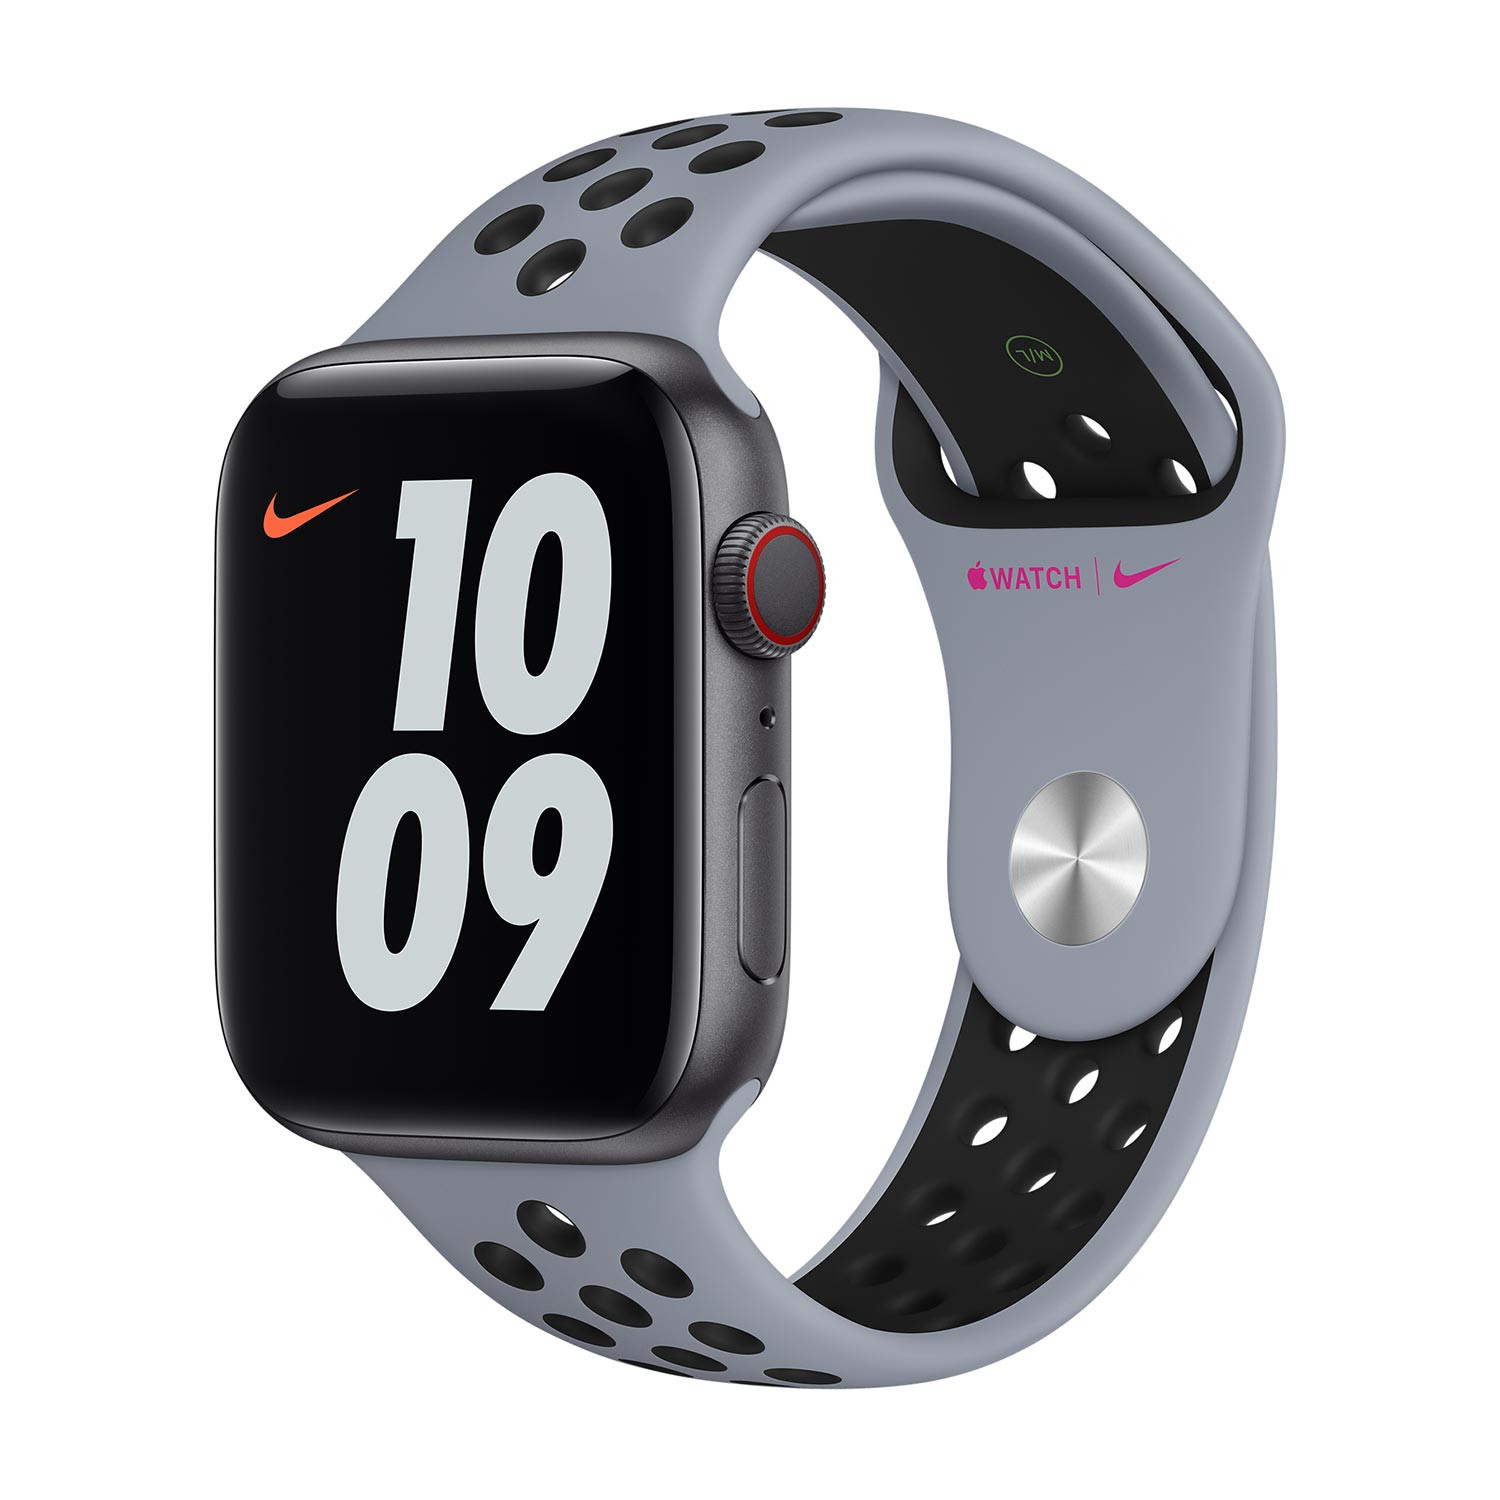 WATCH BAND FOR APPLE WATCH